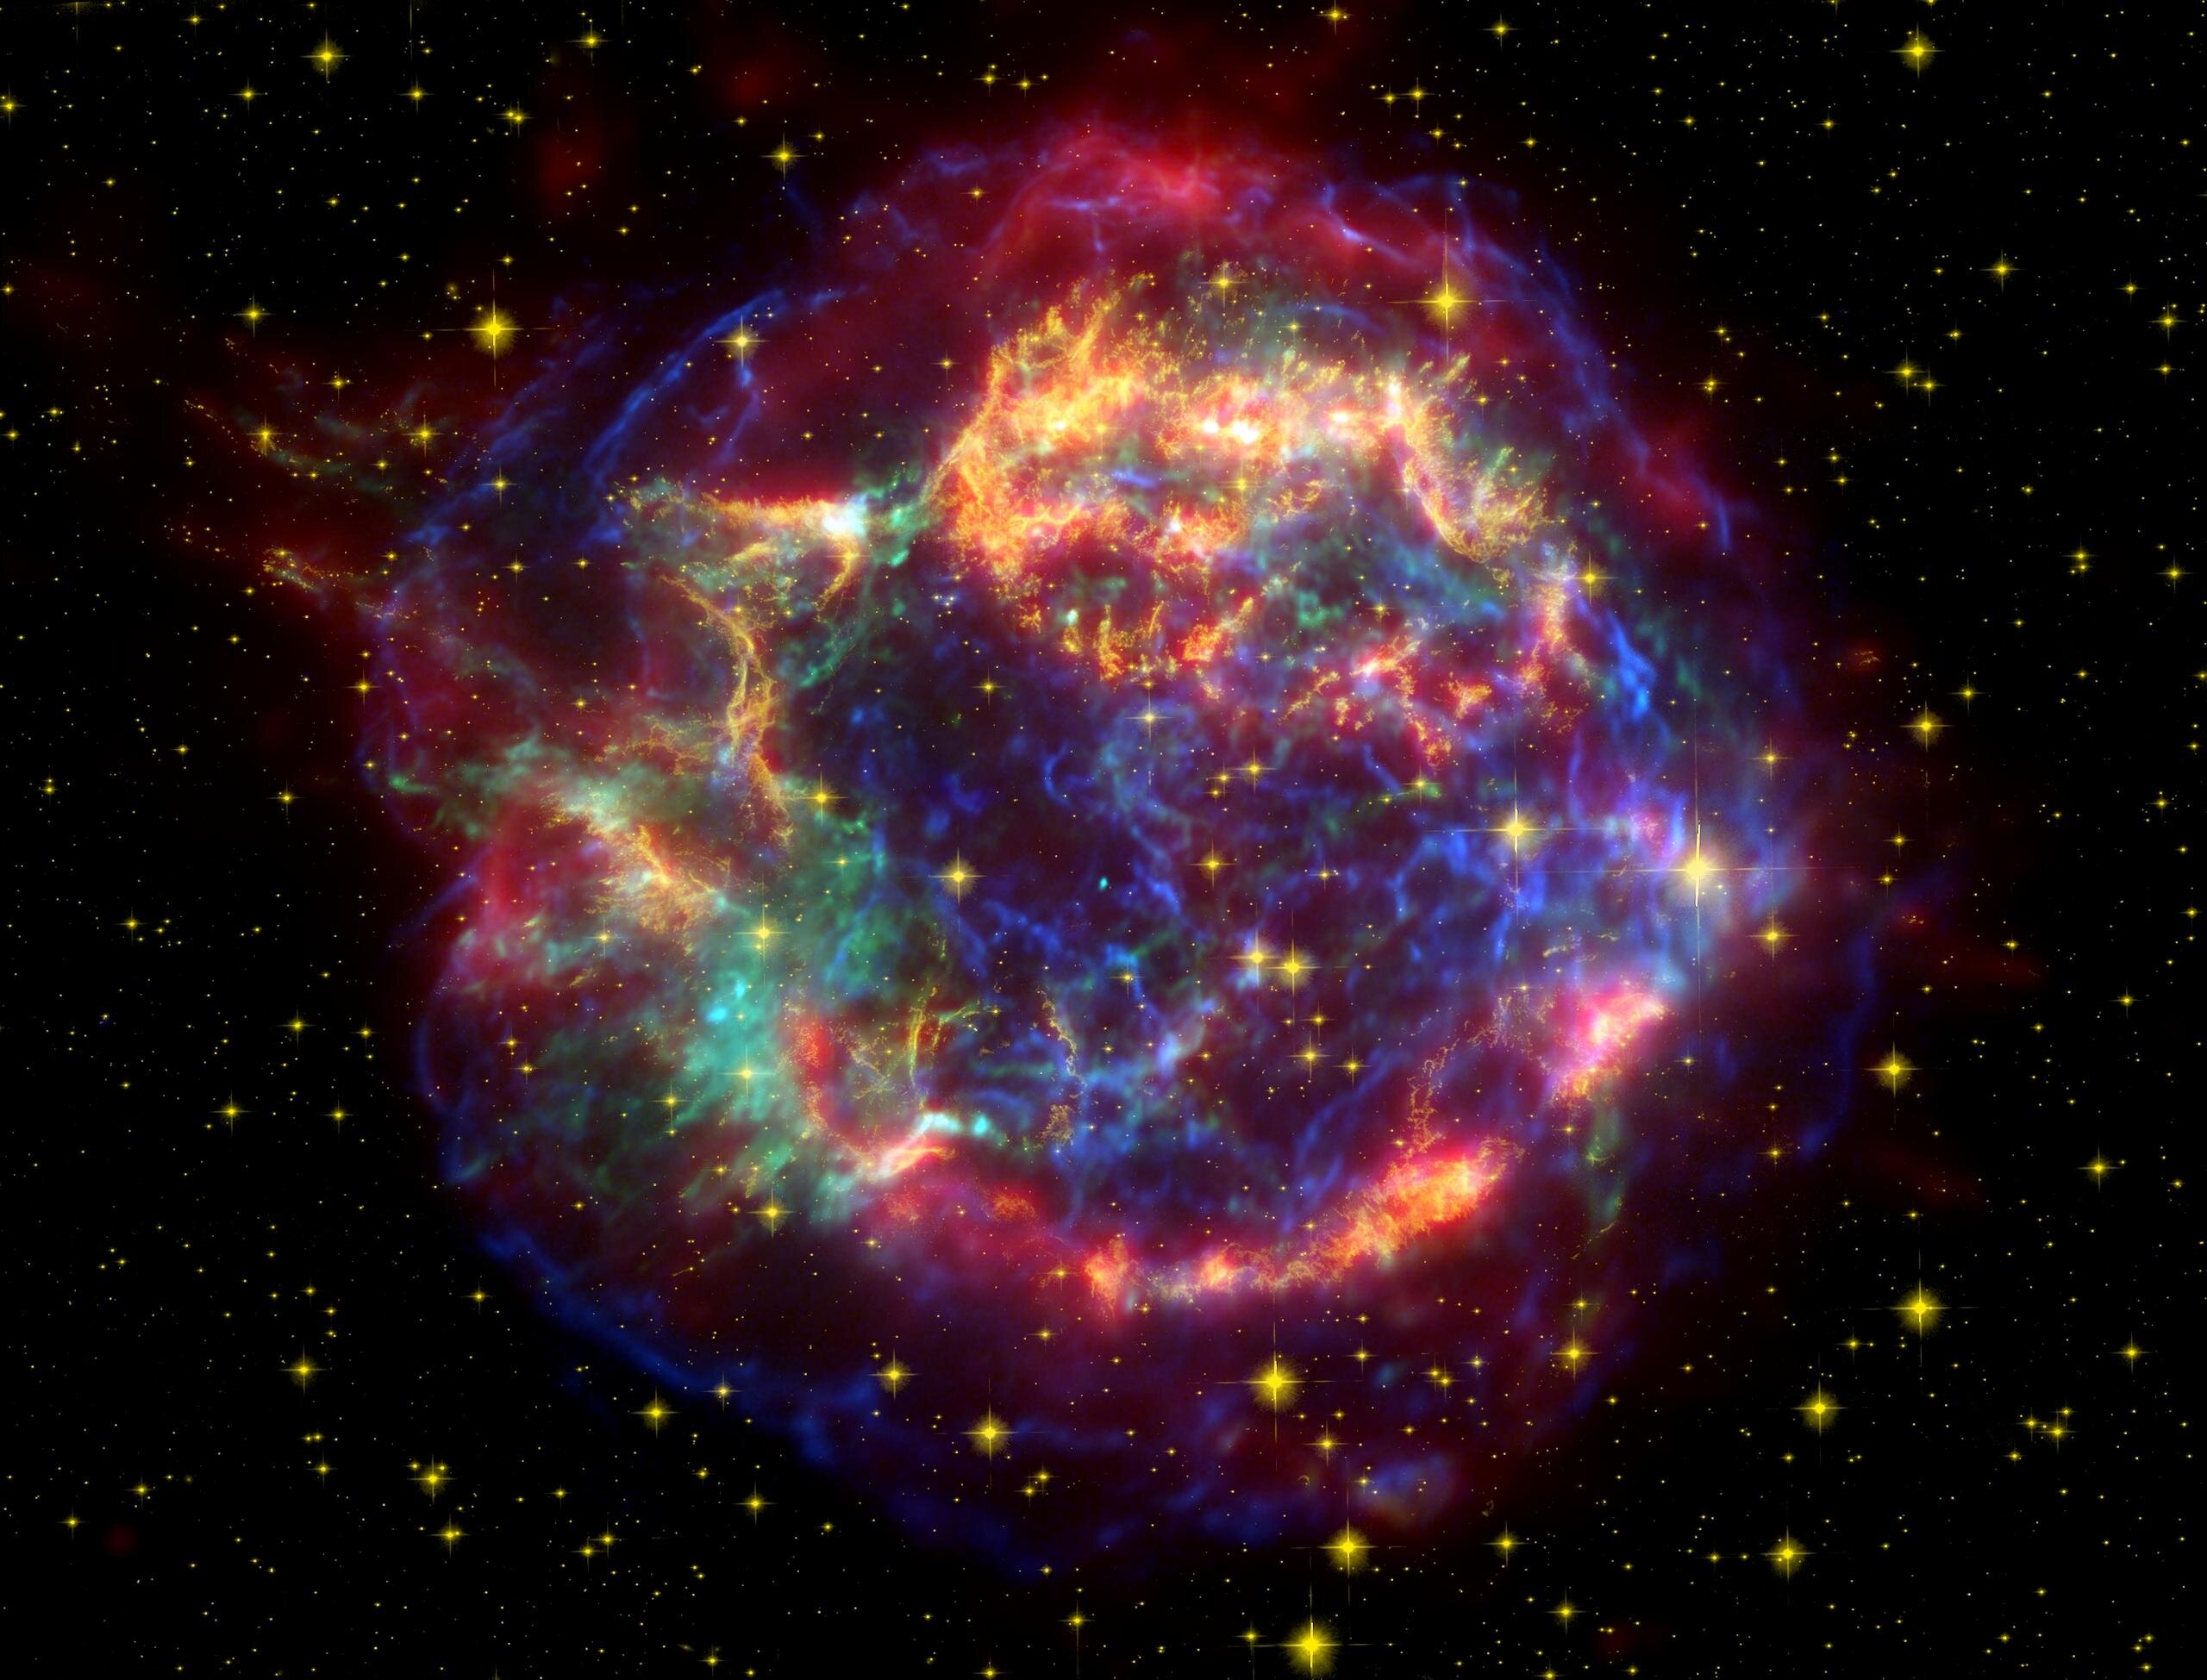 Coloured image of Cassiopeia A based on data from the space telescopes Hubble, Spitzer en Chandra. Credit: NASA/JPL-Caltech